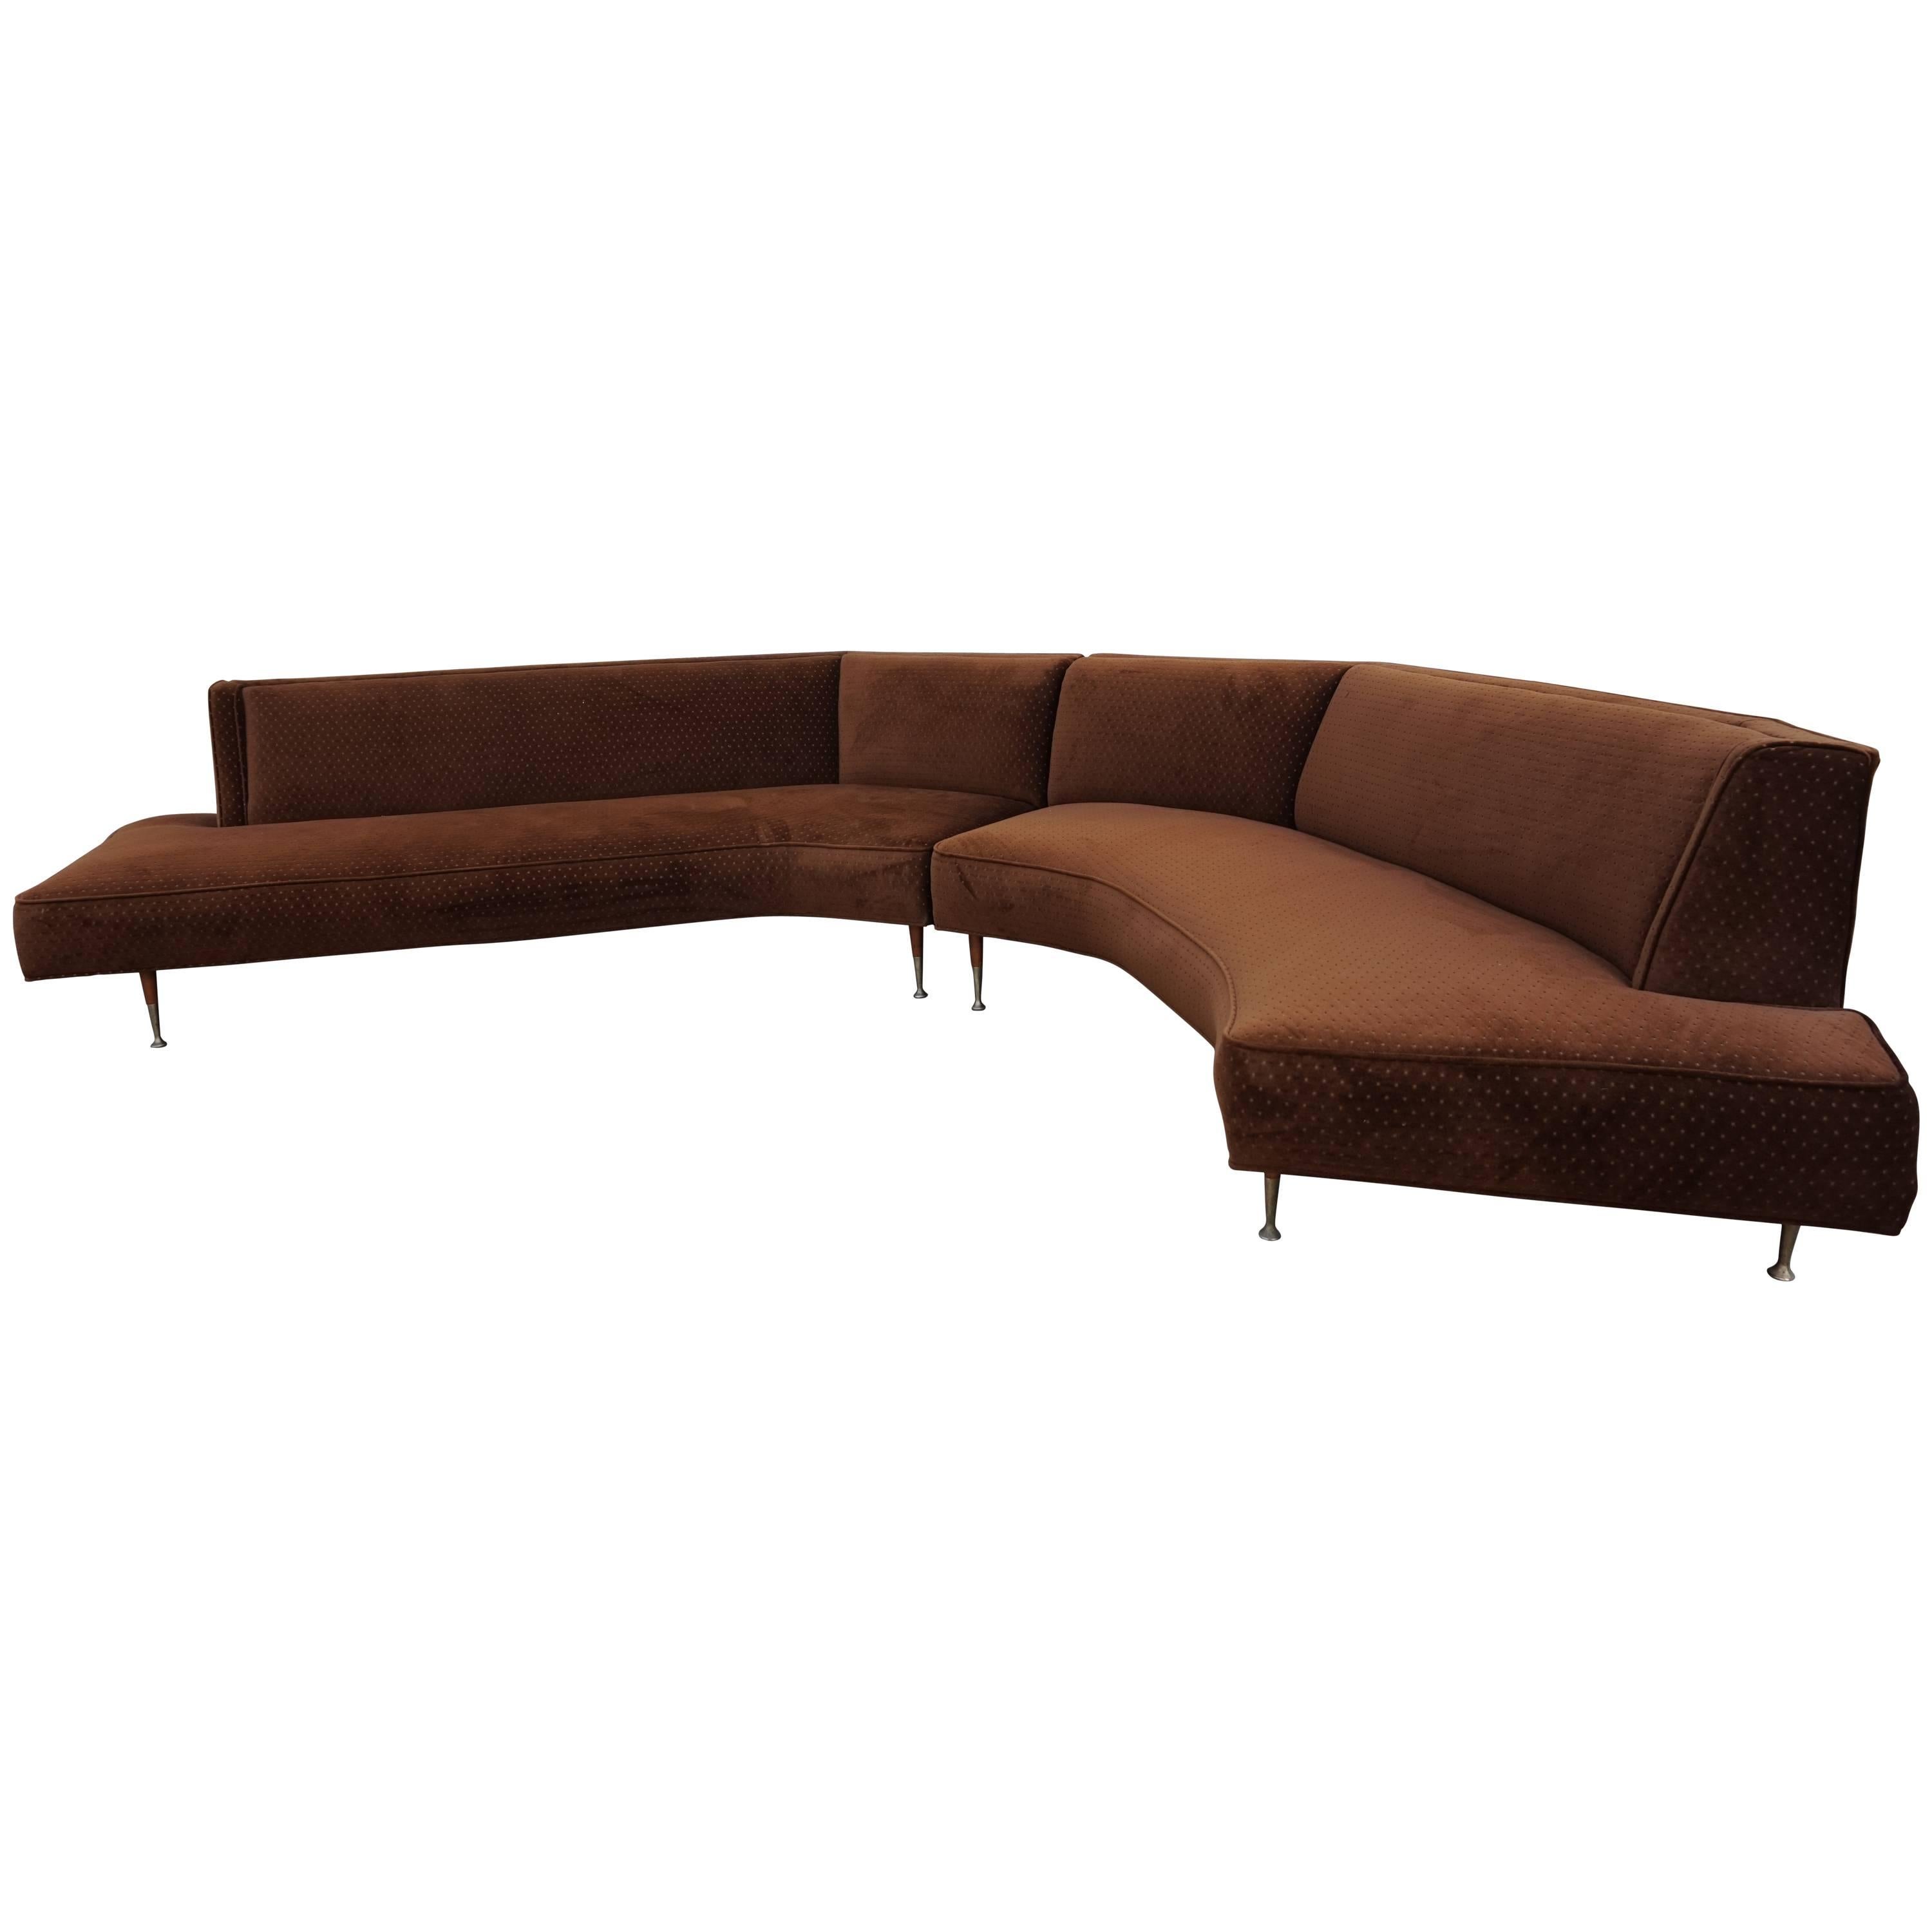 Gorgeous Harvey Probber Style Two-Piece Curved Sofa Sectional Mid-Century Modern